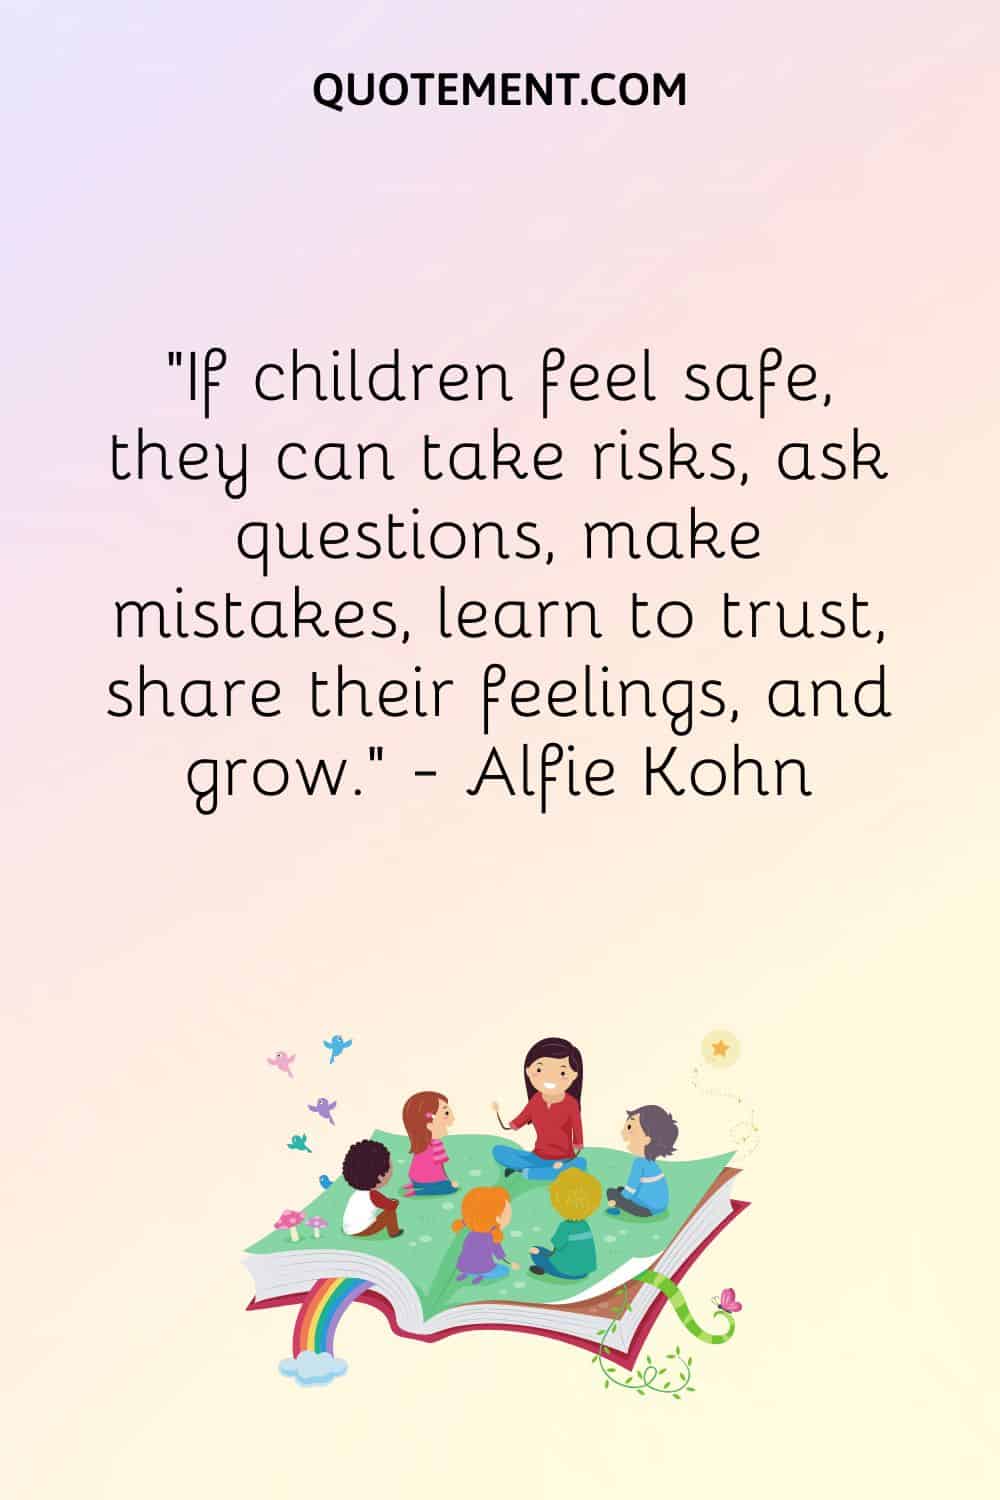 If children feel safe, they can take risks, ask questions, make mistakes, learn to trust, share their feelings, and grow